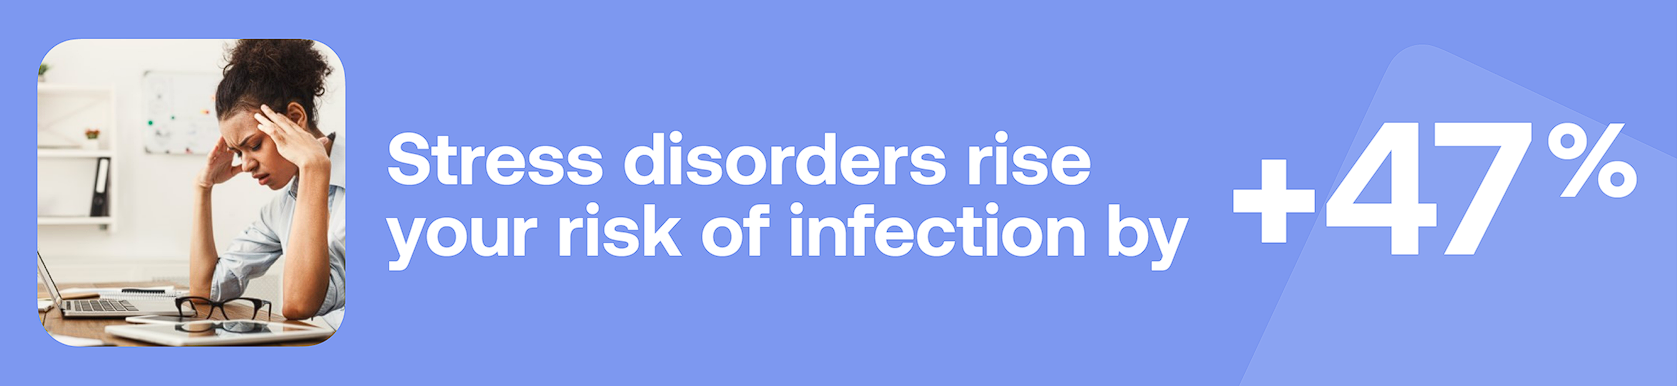 Stress disorders rise your risk of infection by +47%